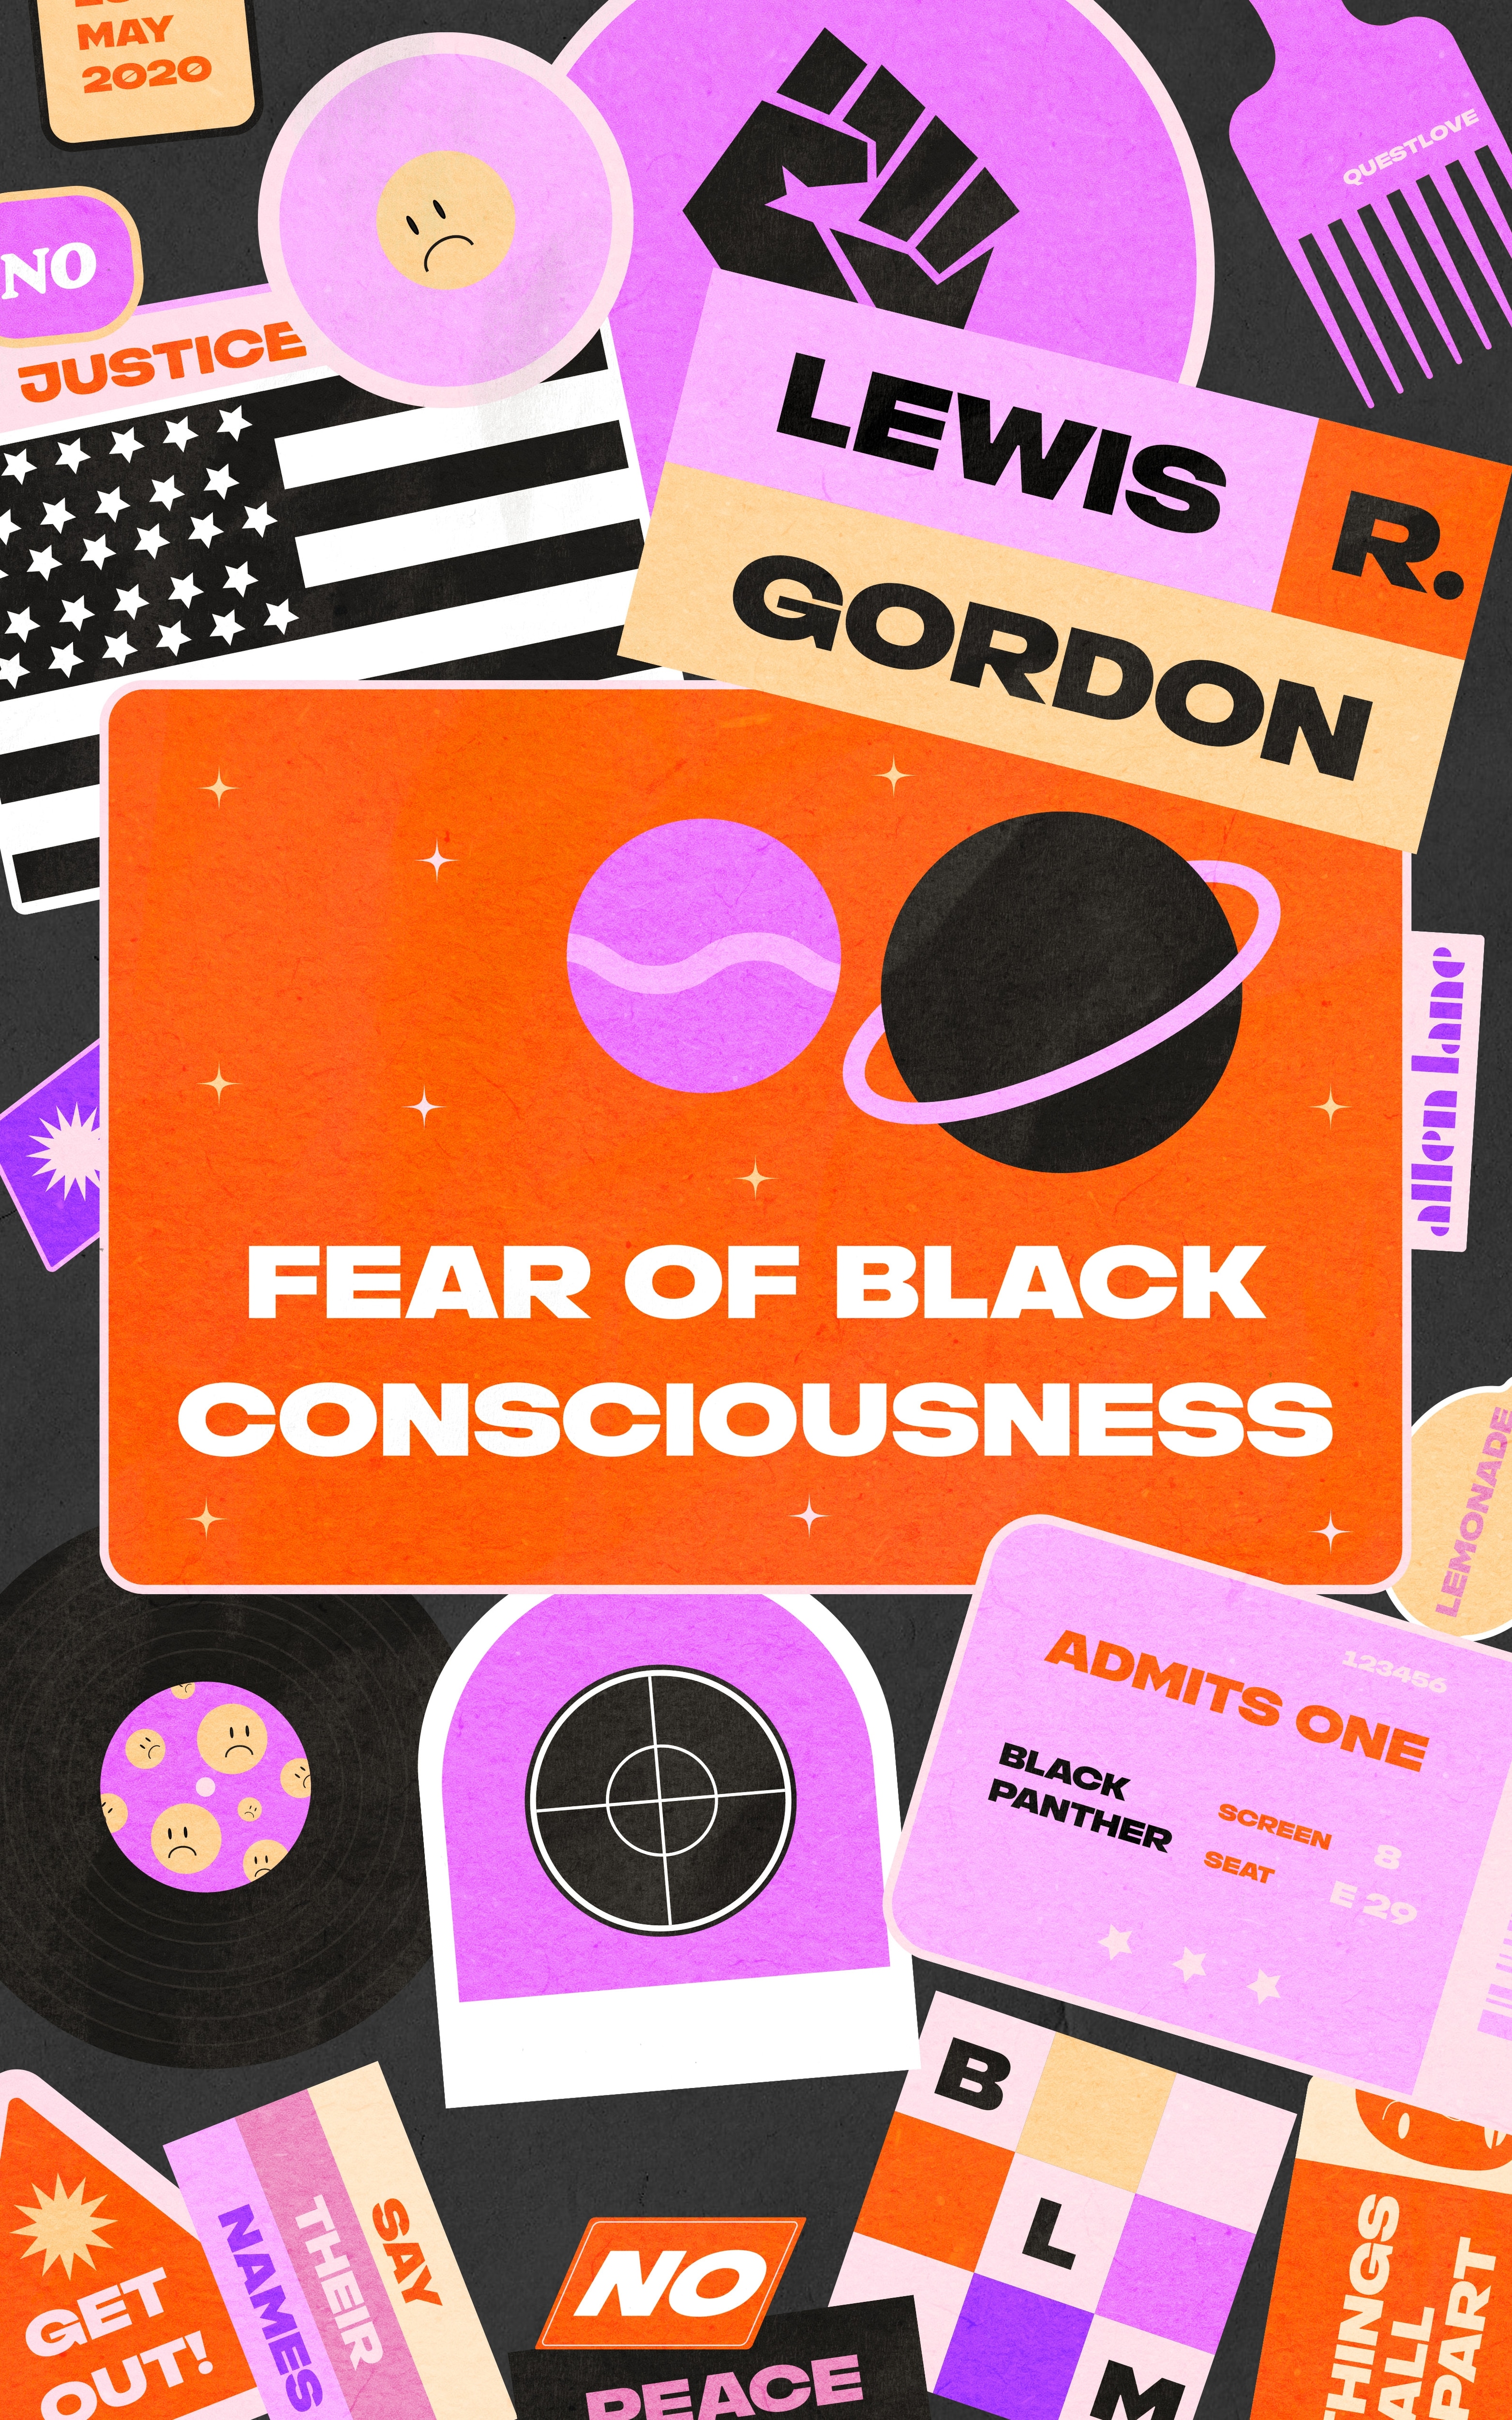 Book “Fear of Black Consciousness” by Lewis R. Gordon — January 11, 2022